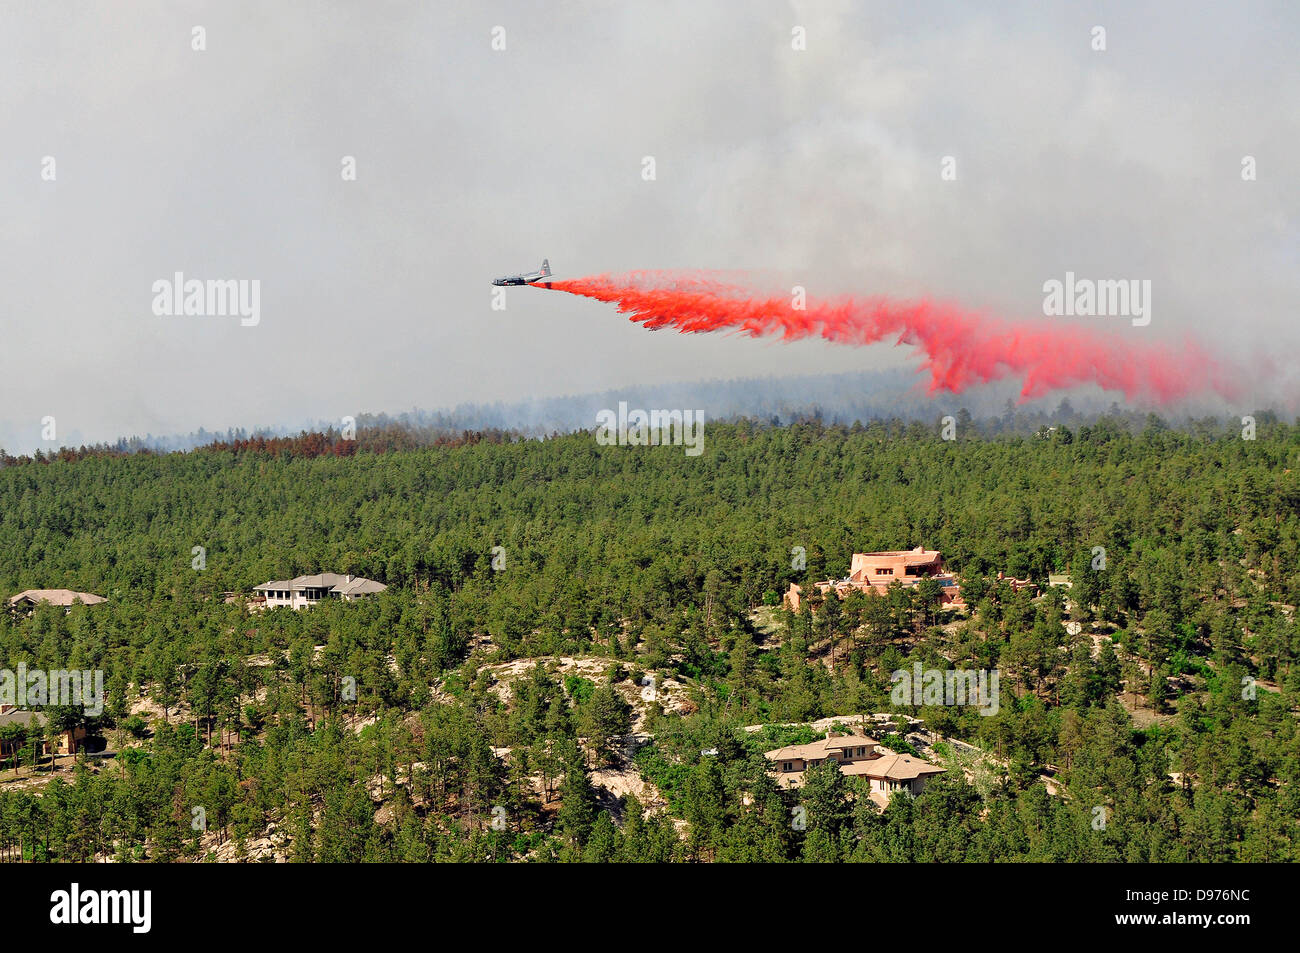 A DC-10 Air Tanker drops fire retardant to assist in fighting the Black Forest fire June 12, 2013 in El Paso County, CO. More than 100 homes have burnt in the fire south of Colorado Springs, CO. Stock Photo